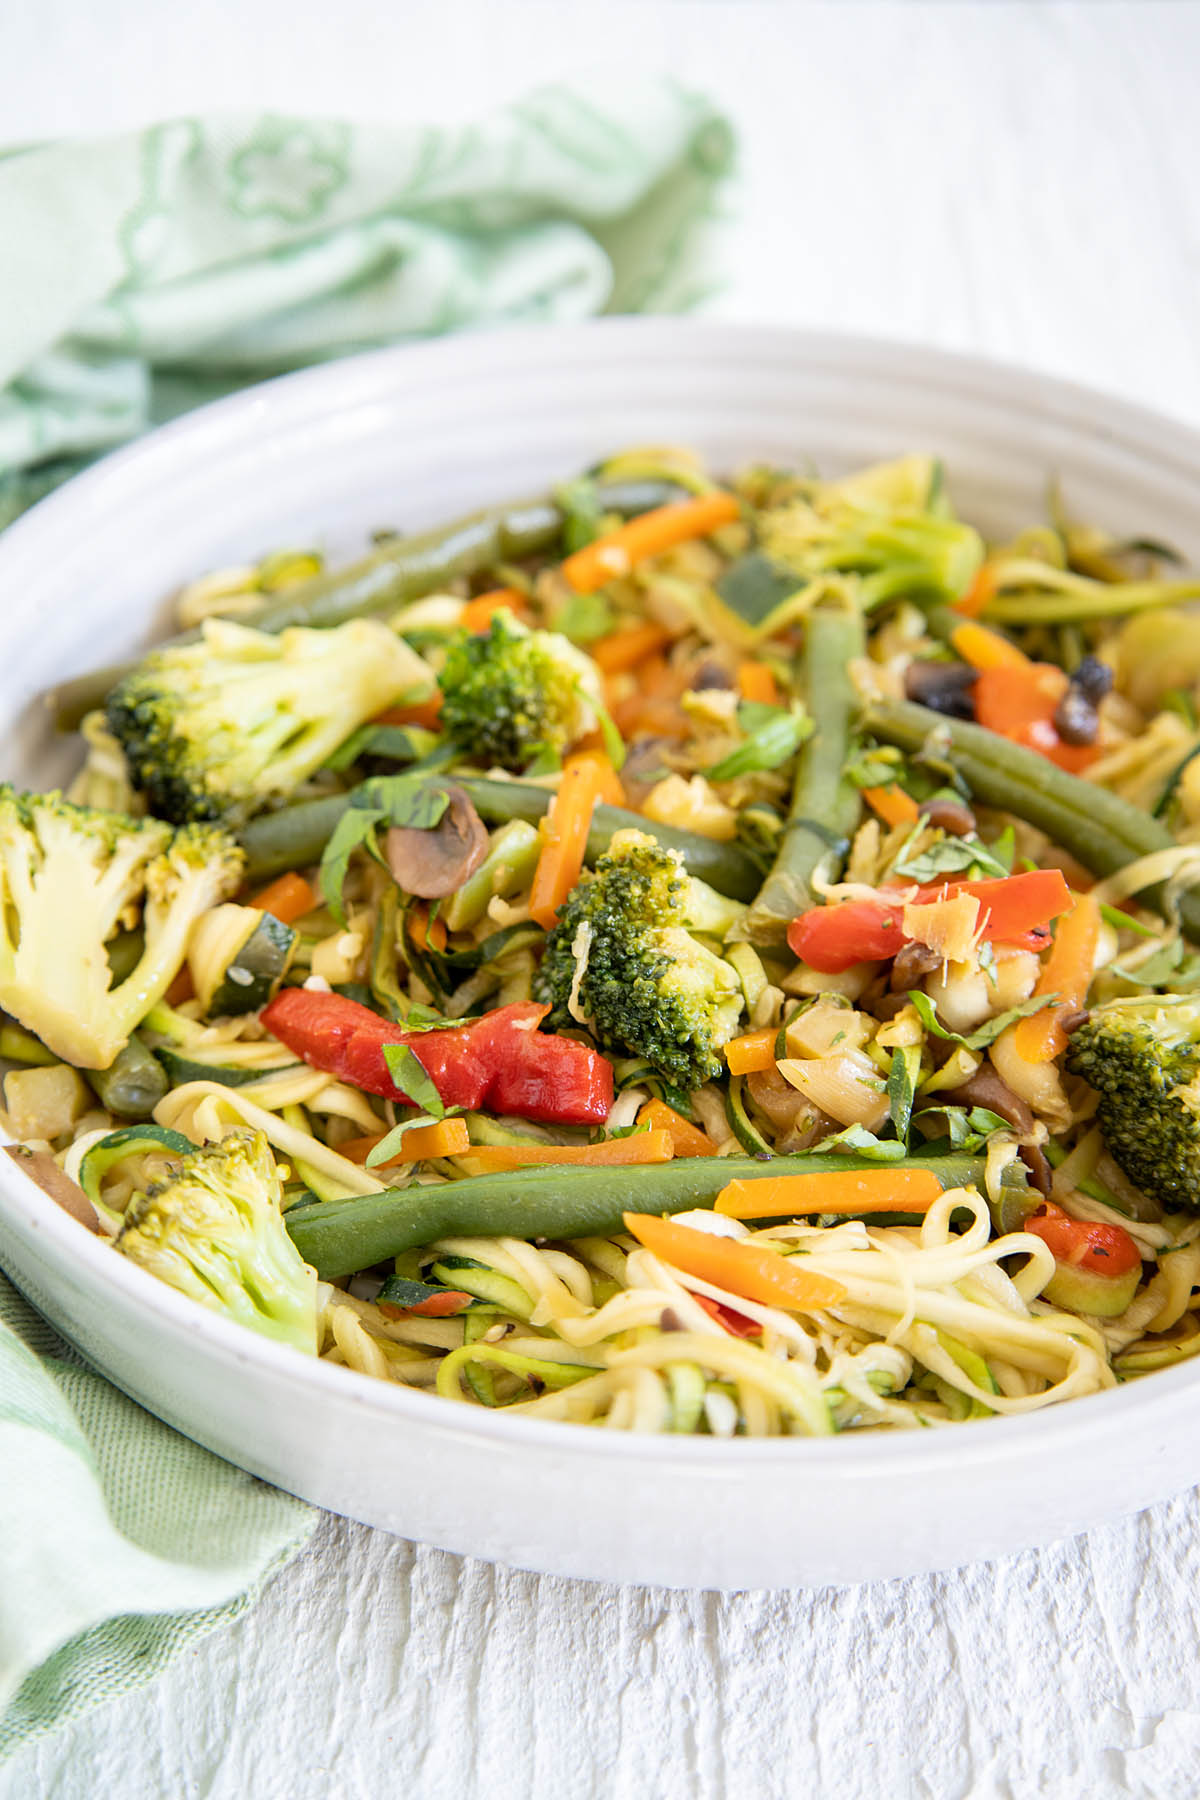 Frozen Vegetable Stir Fry With Zucchini Noodles in a bowl.